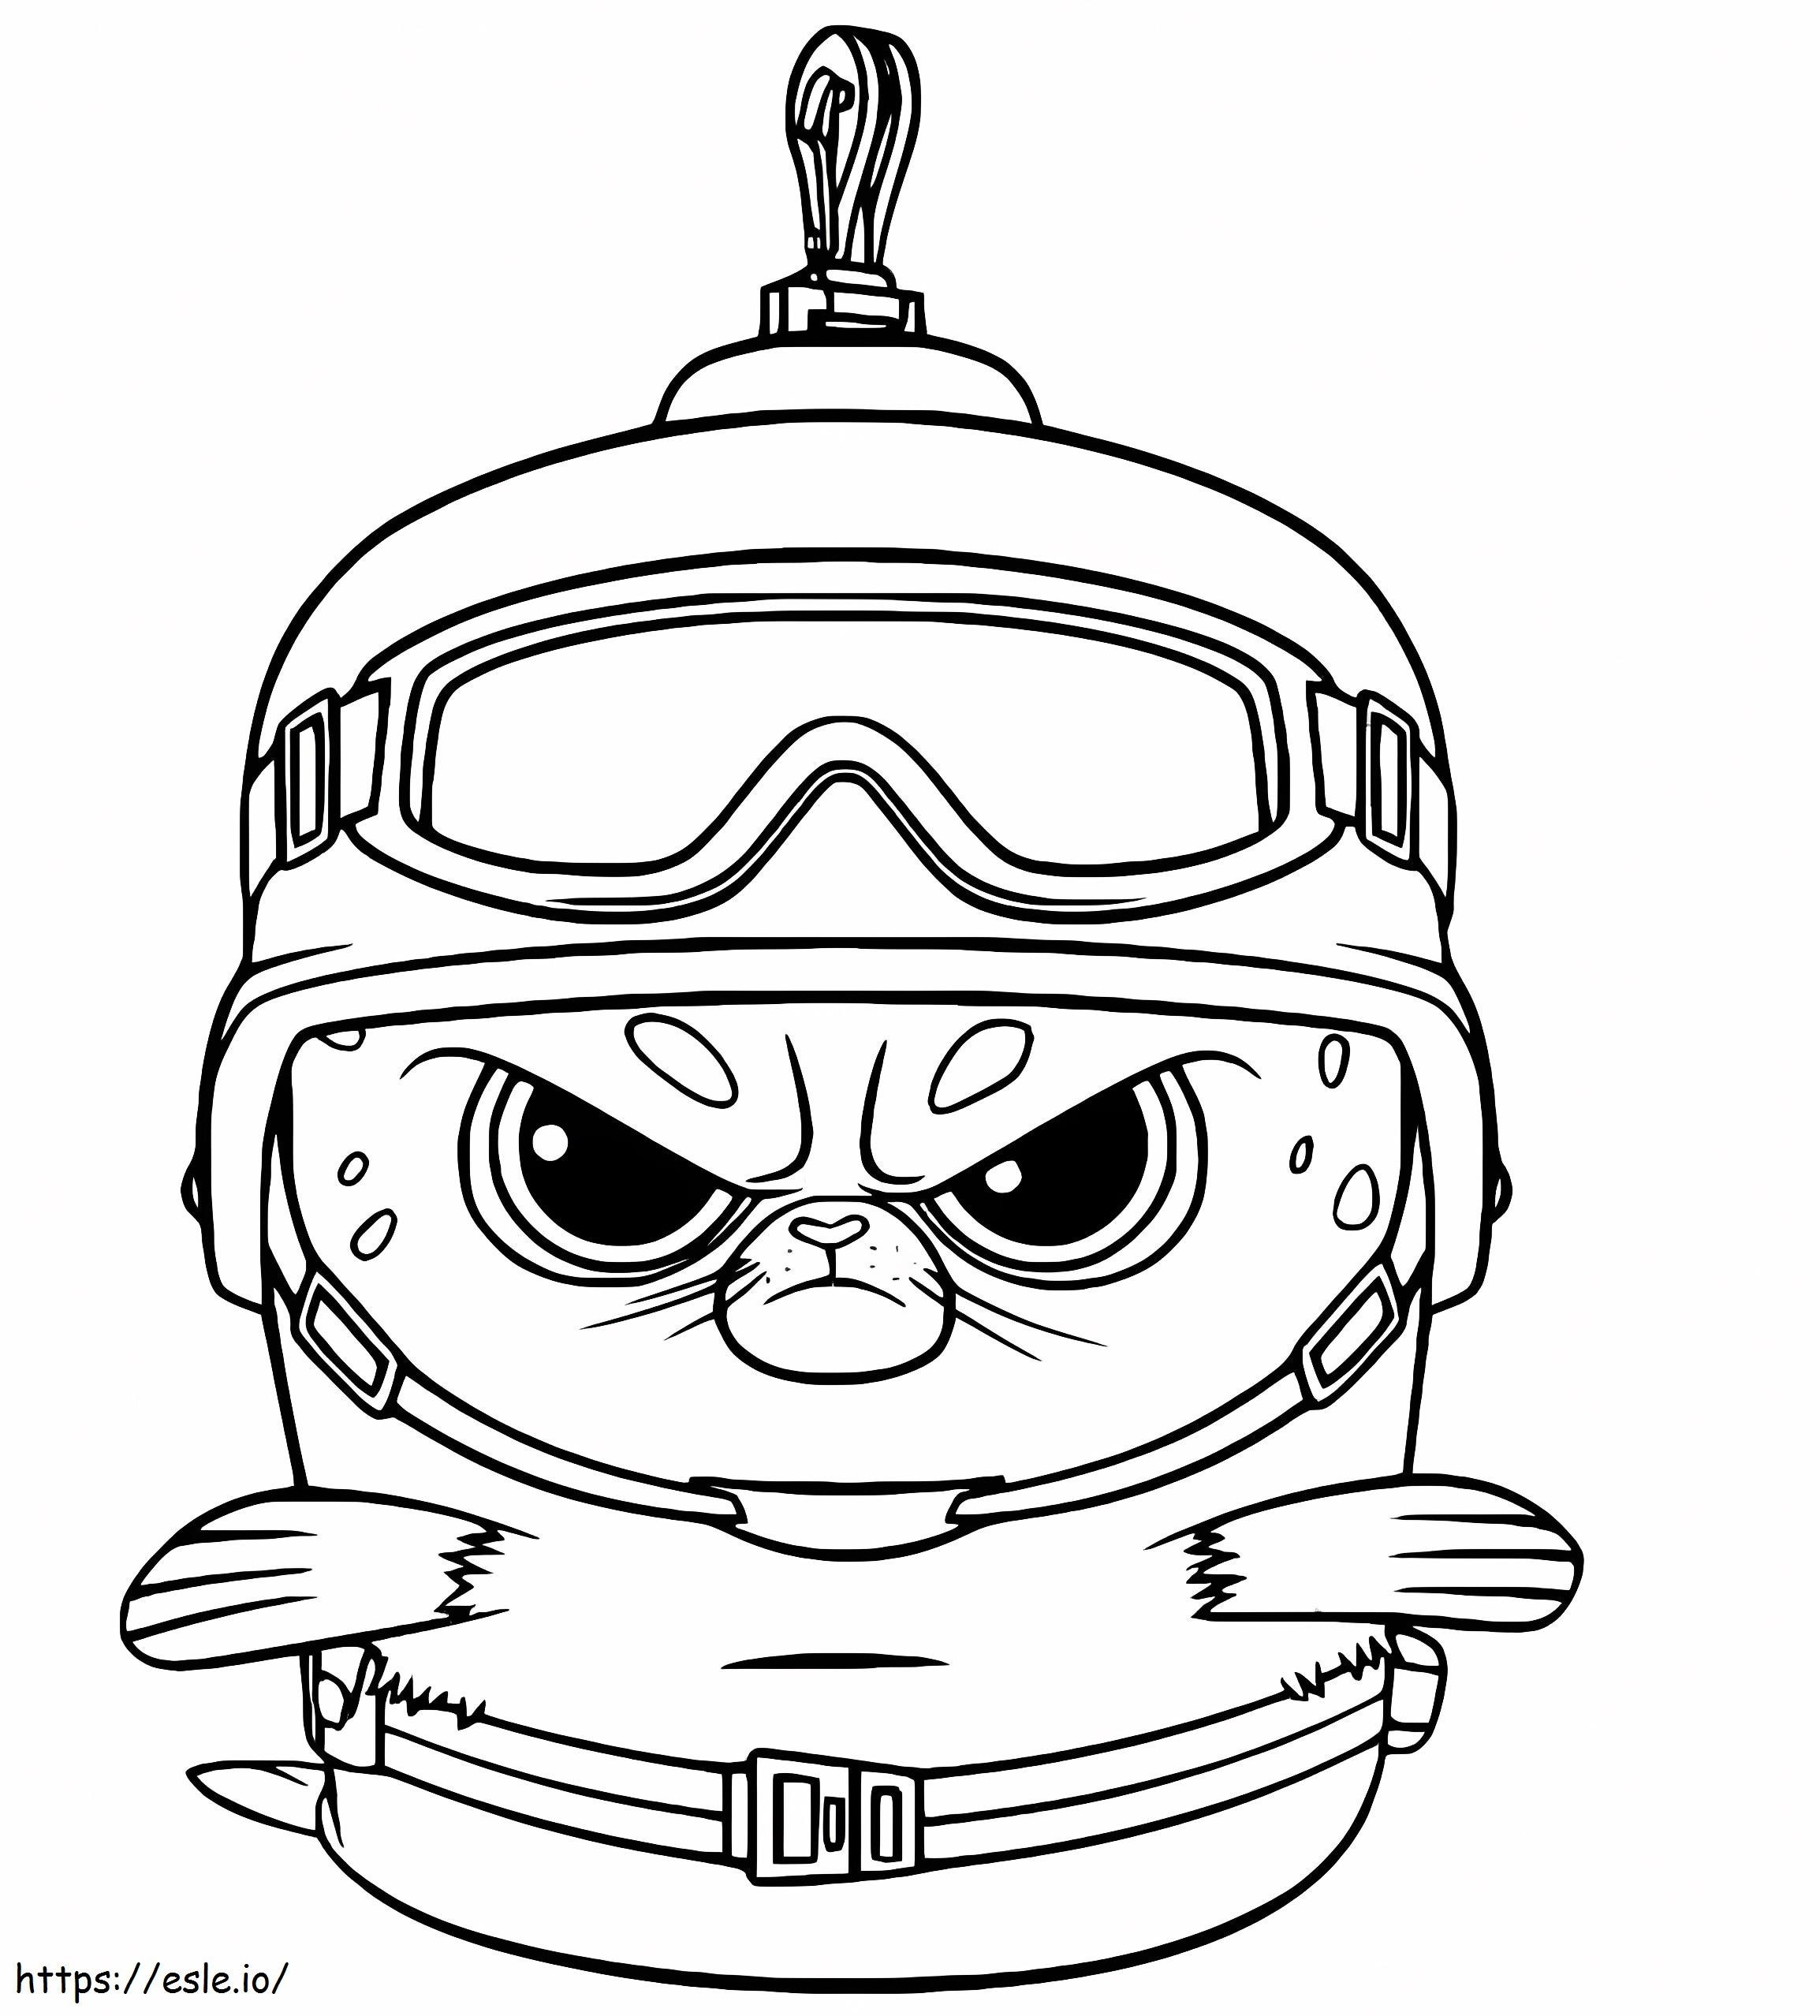 Short Fuse From Penguins Of Madagascar coloring page